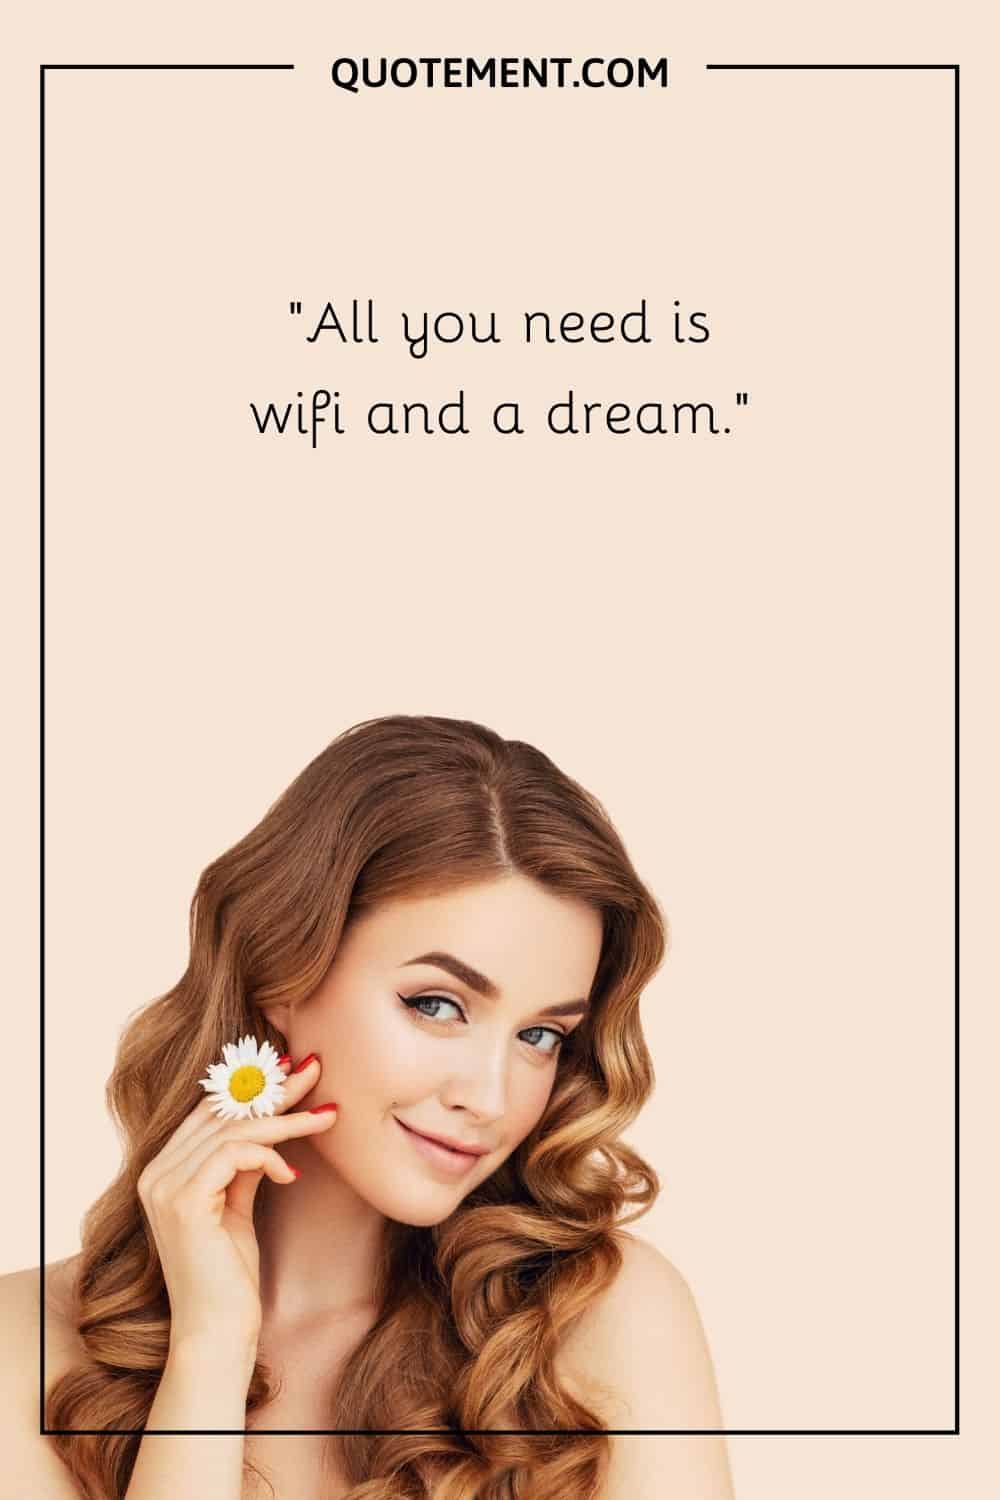 All you need is wifi and a dream.